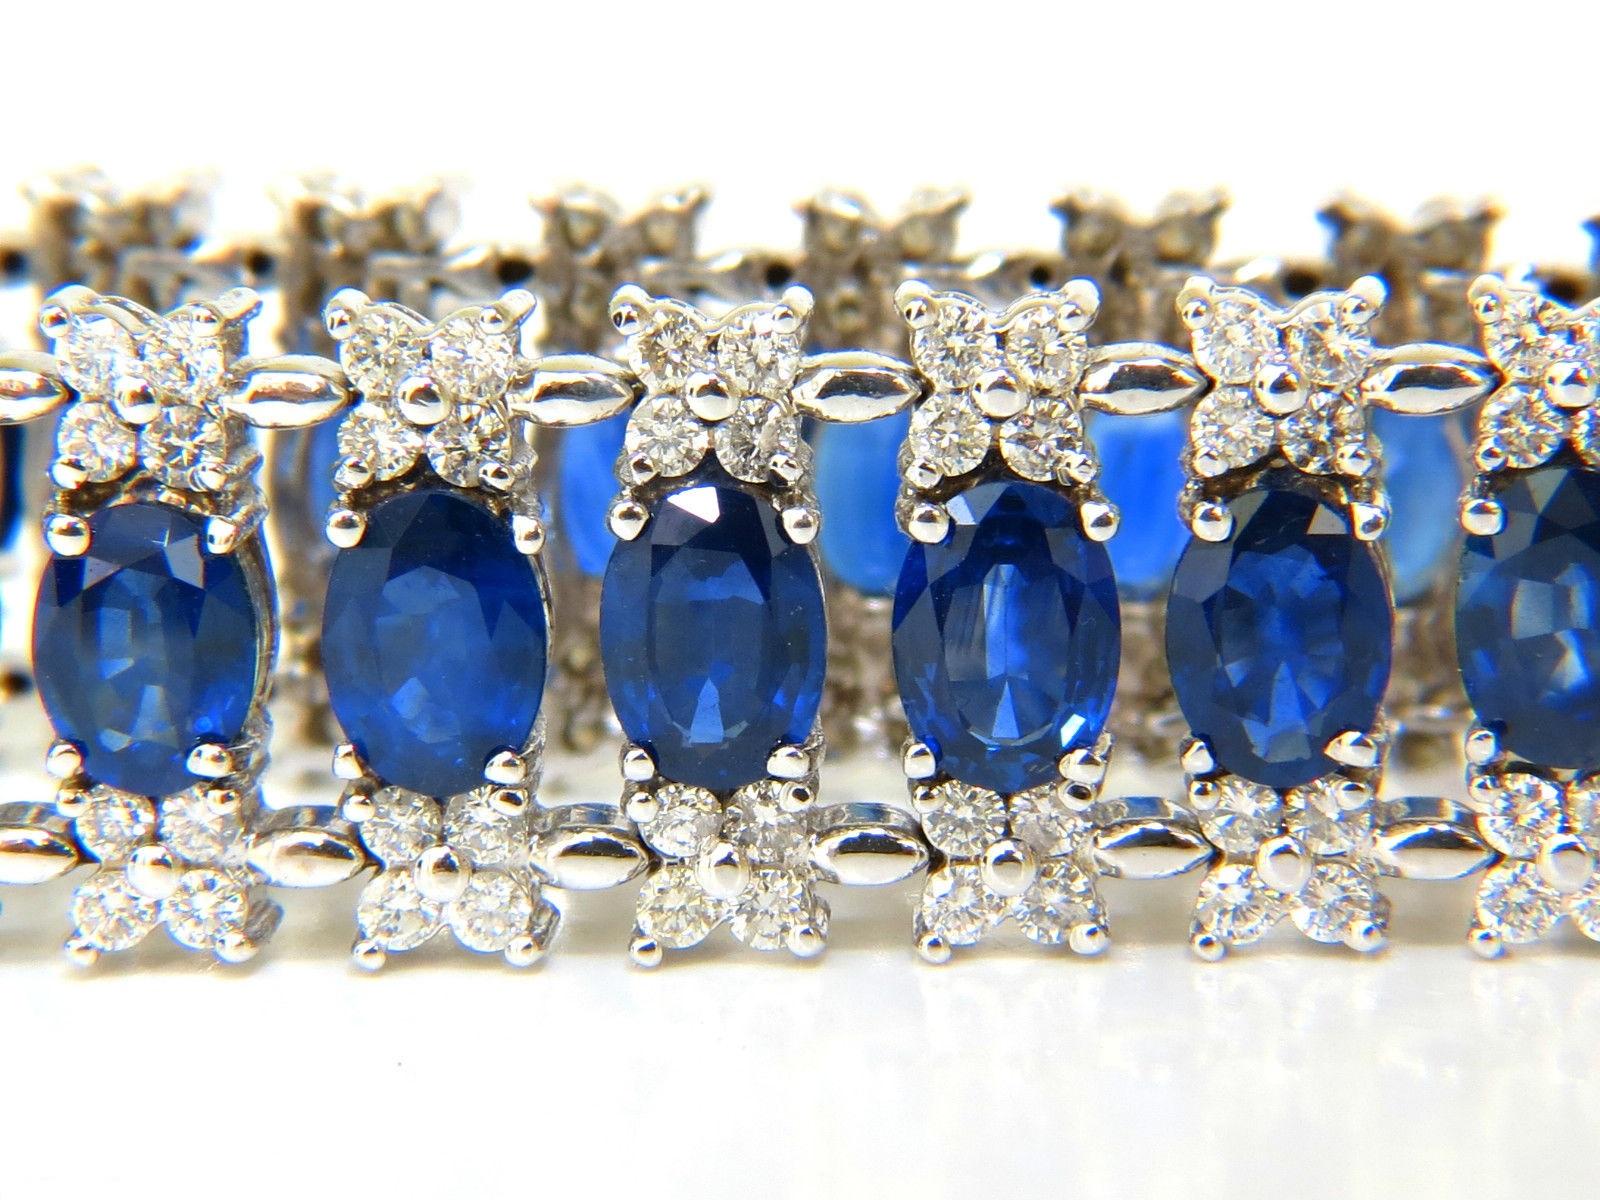 33.75 Carat Natural Gem Sapphire Diamond Bracelet Three-Row and Wide Cuff For Sale 1